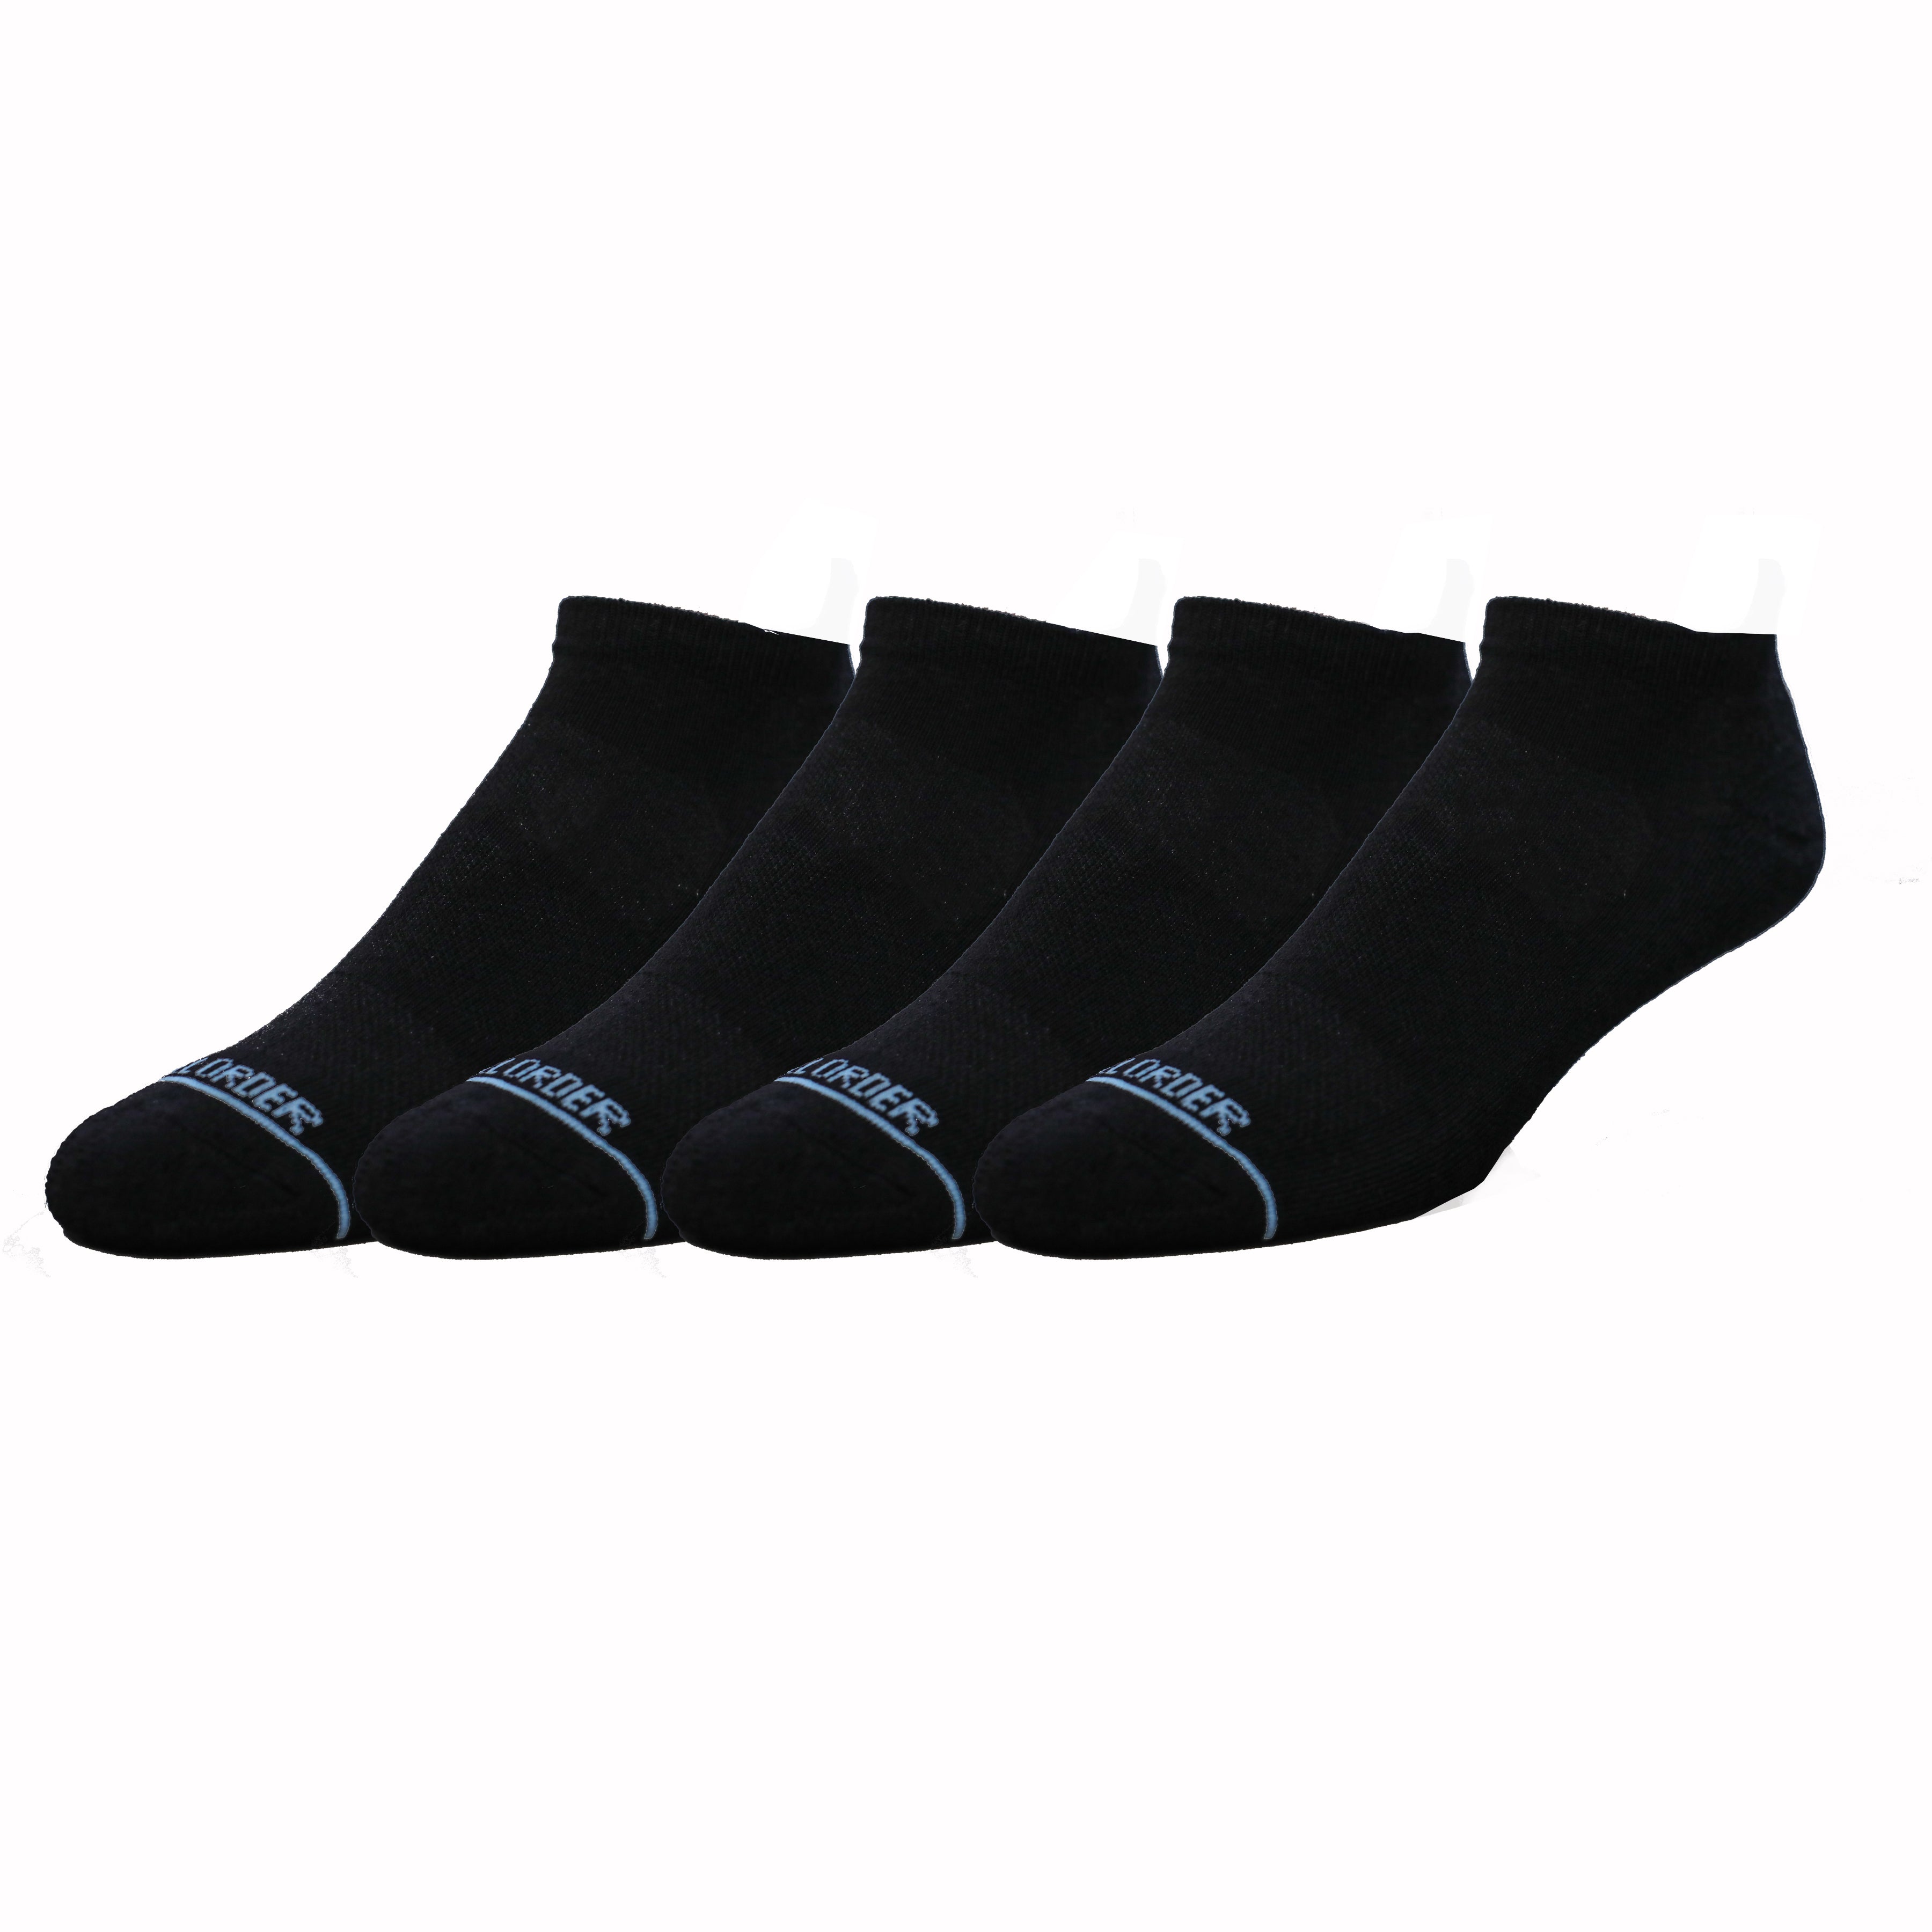 Solid Black Two Pack - Extra Cushioned Ankle Socks | Tall Order